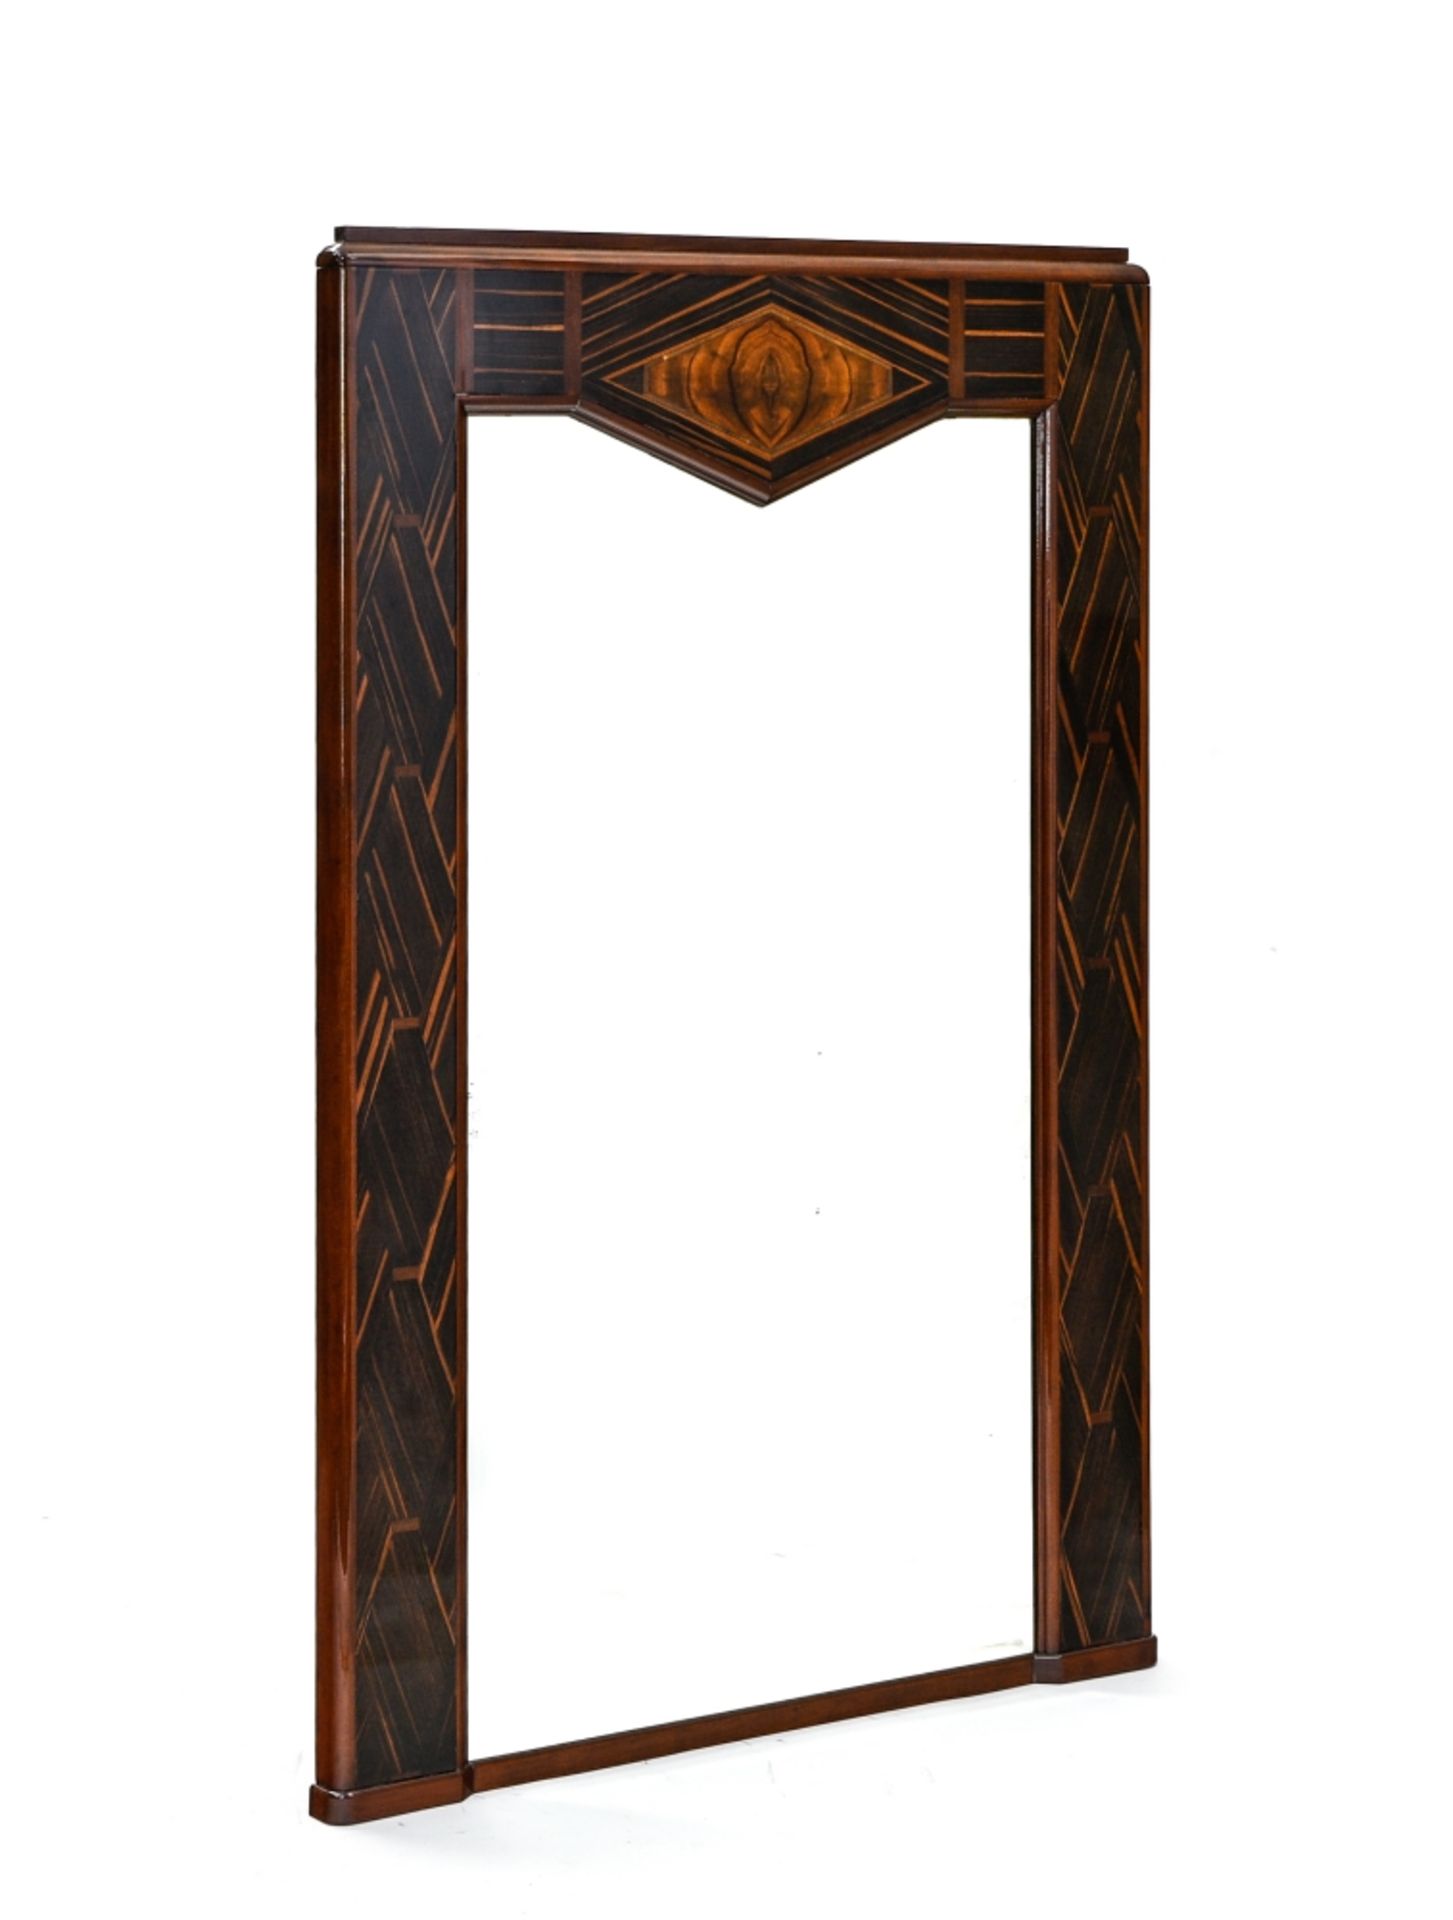 Christian KRASS (1868-1957) attributed to. Trumeau mirror marquetry and Makassar ebony and